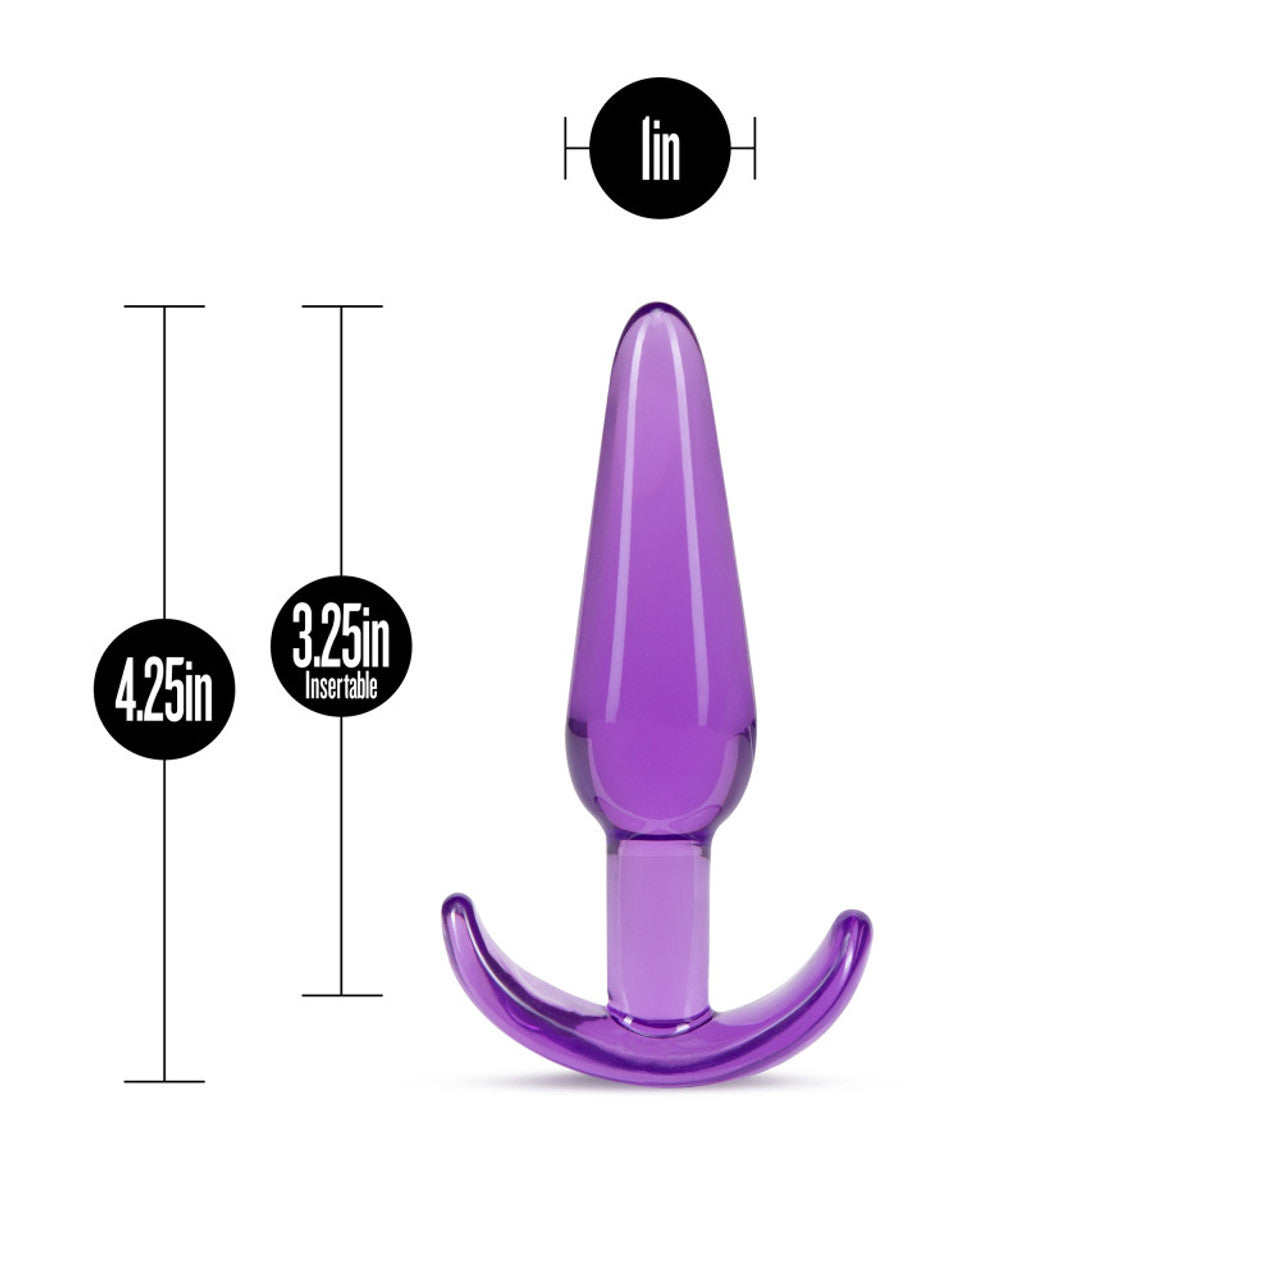 B Yours Slim Tapered See-Through Anal Plug - Purple - Thorn & Feather Sex Toy Canada